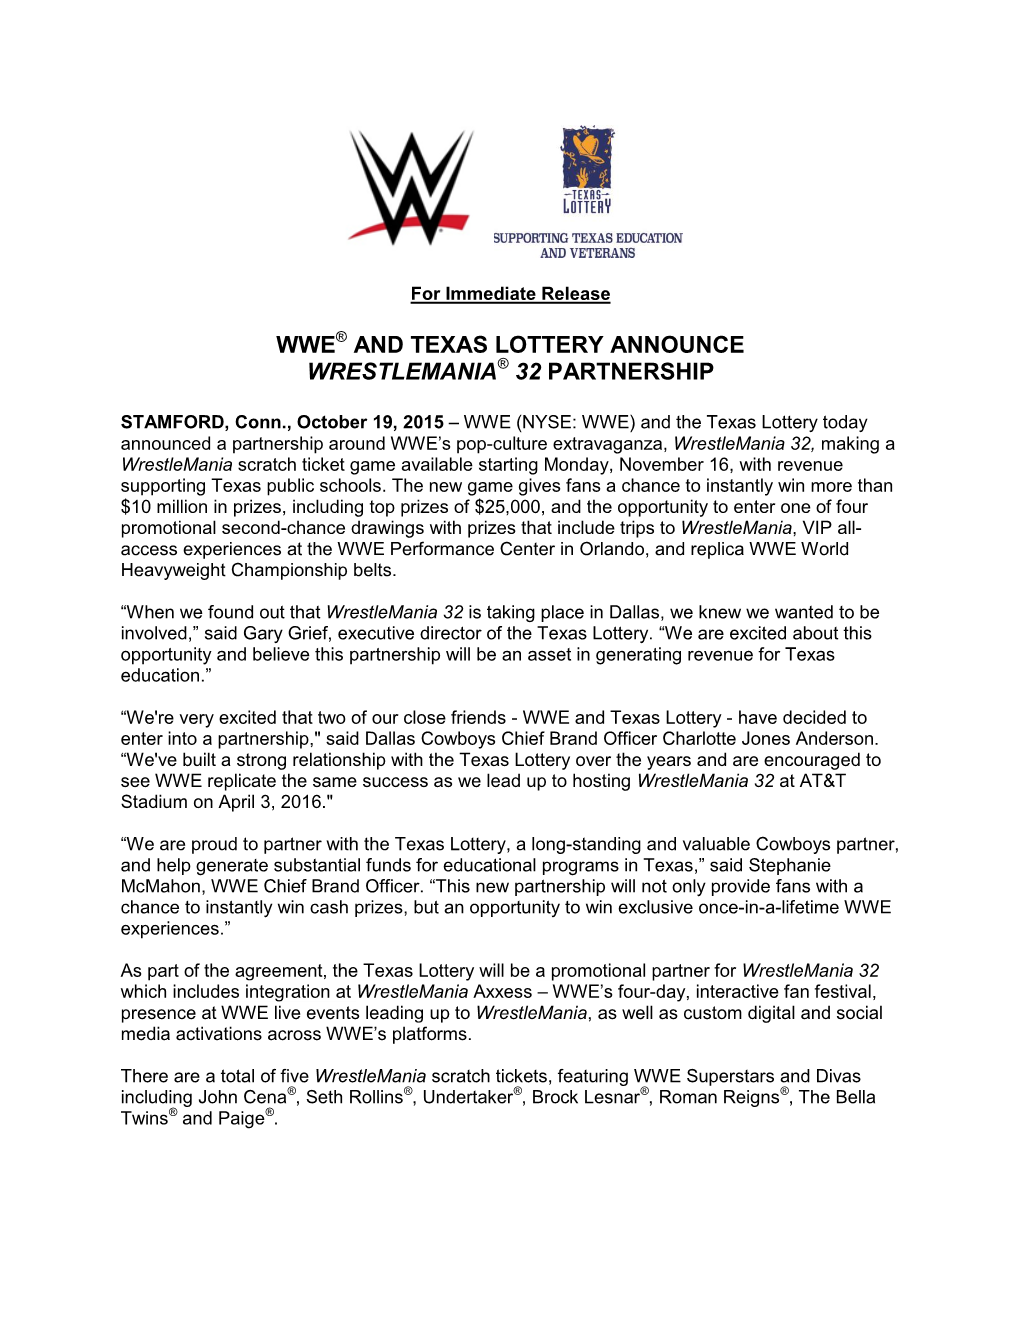 Wwe and Texas Lottery Announce Wrestlemania 32